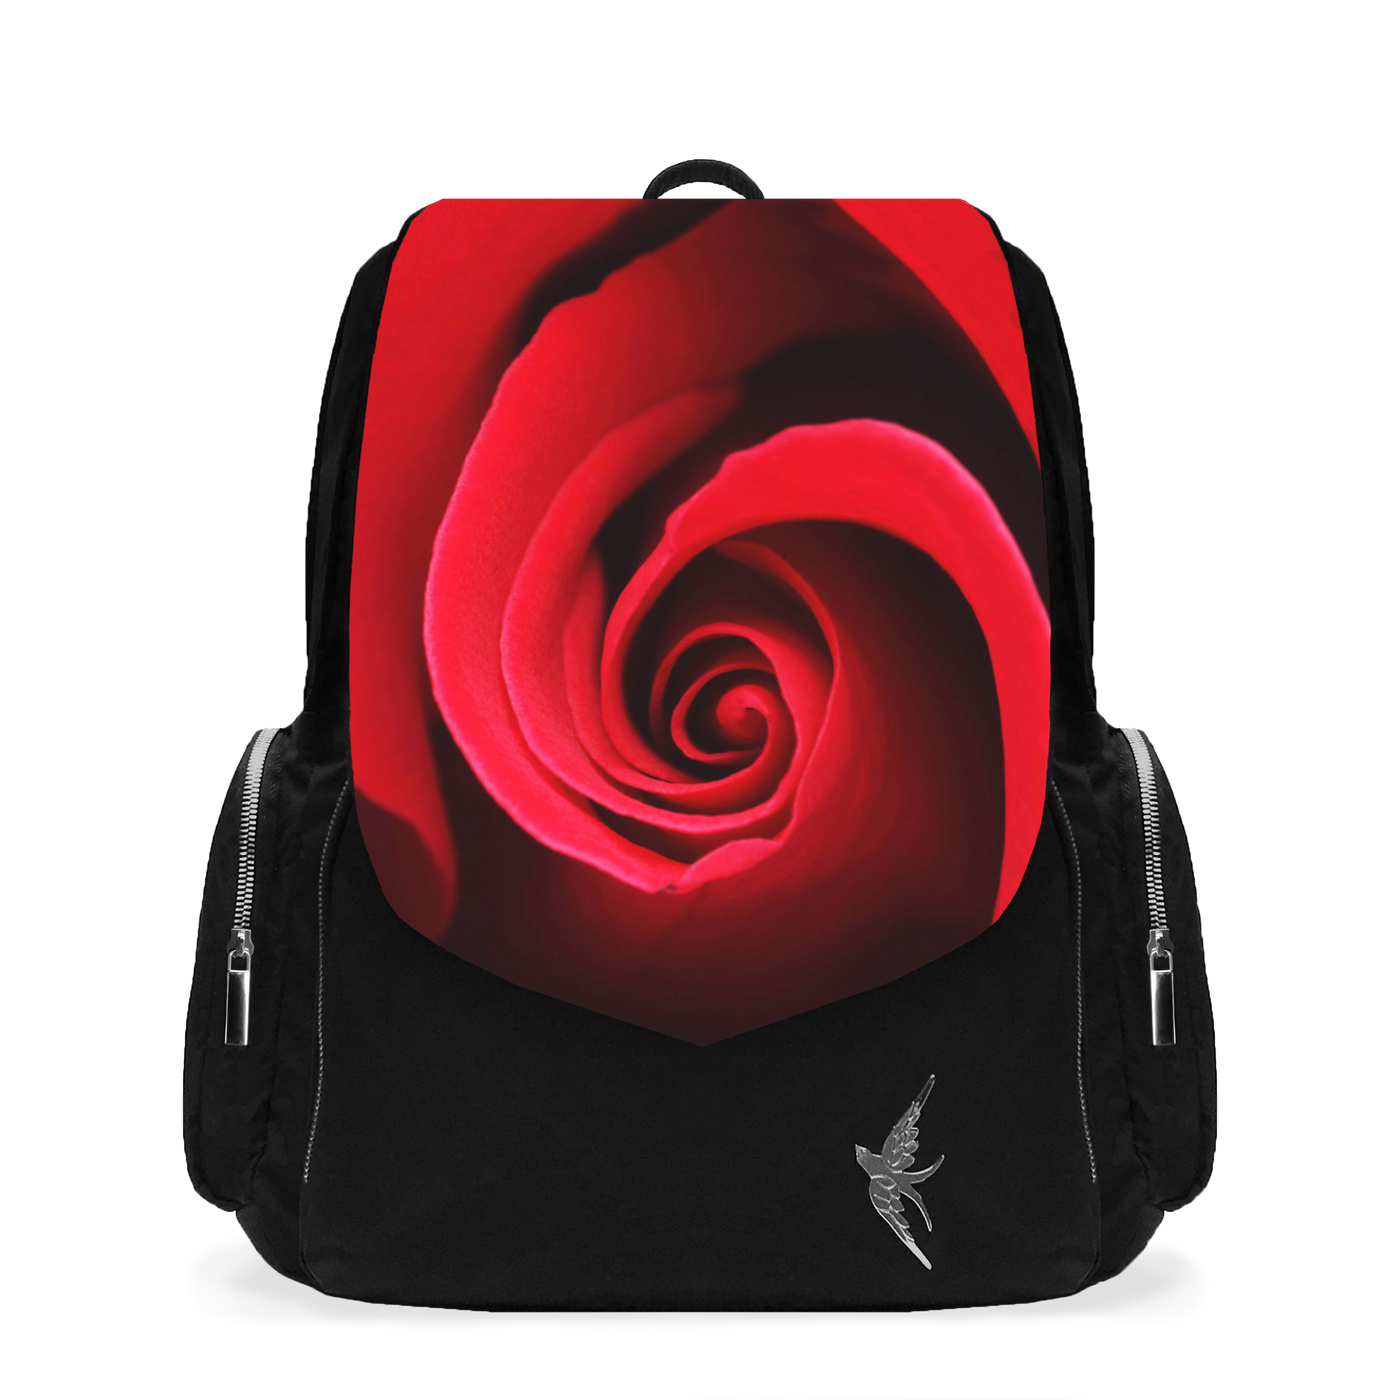 Laptop Backpack with the Modern Rose Print